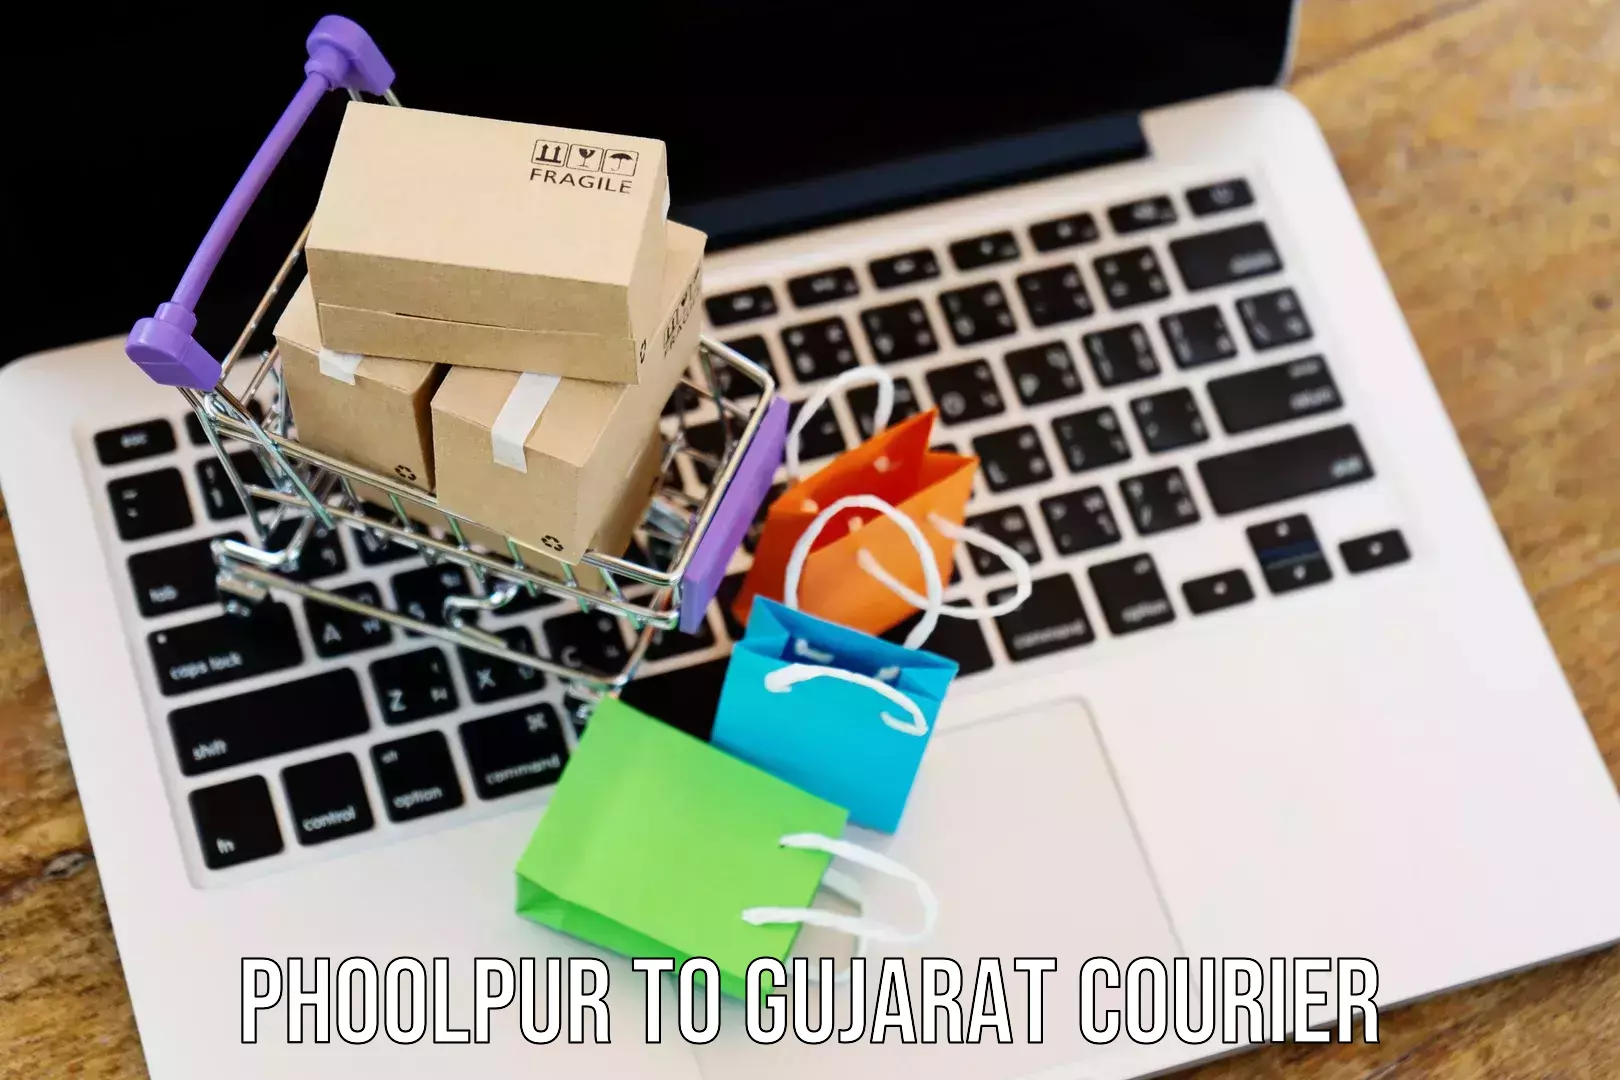 Full-service courier options Phoolpur to Godhra